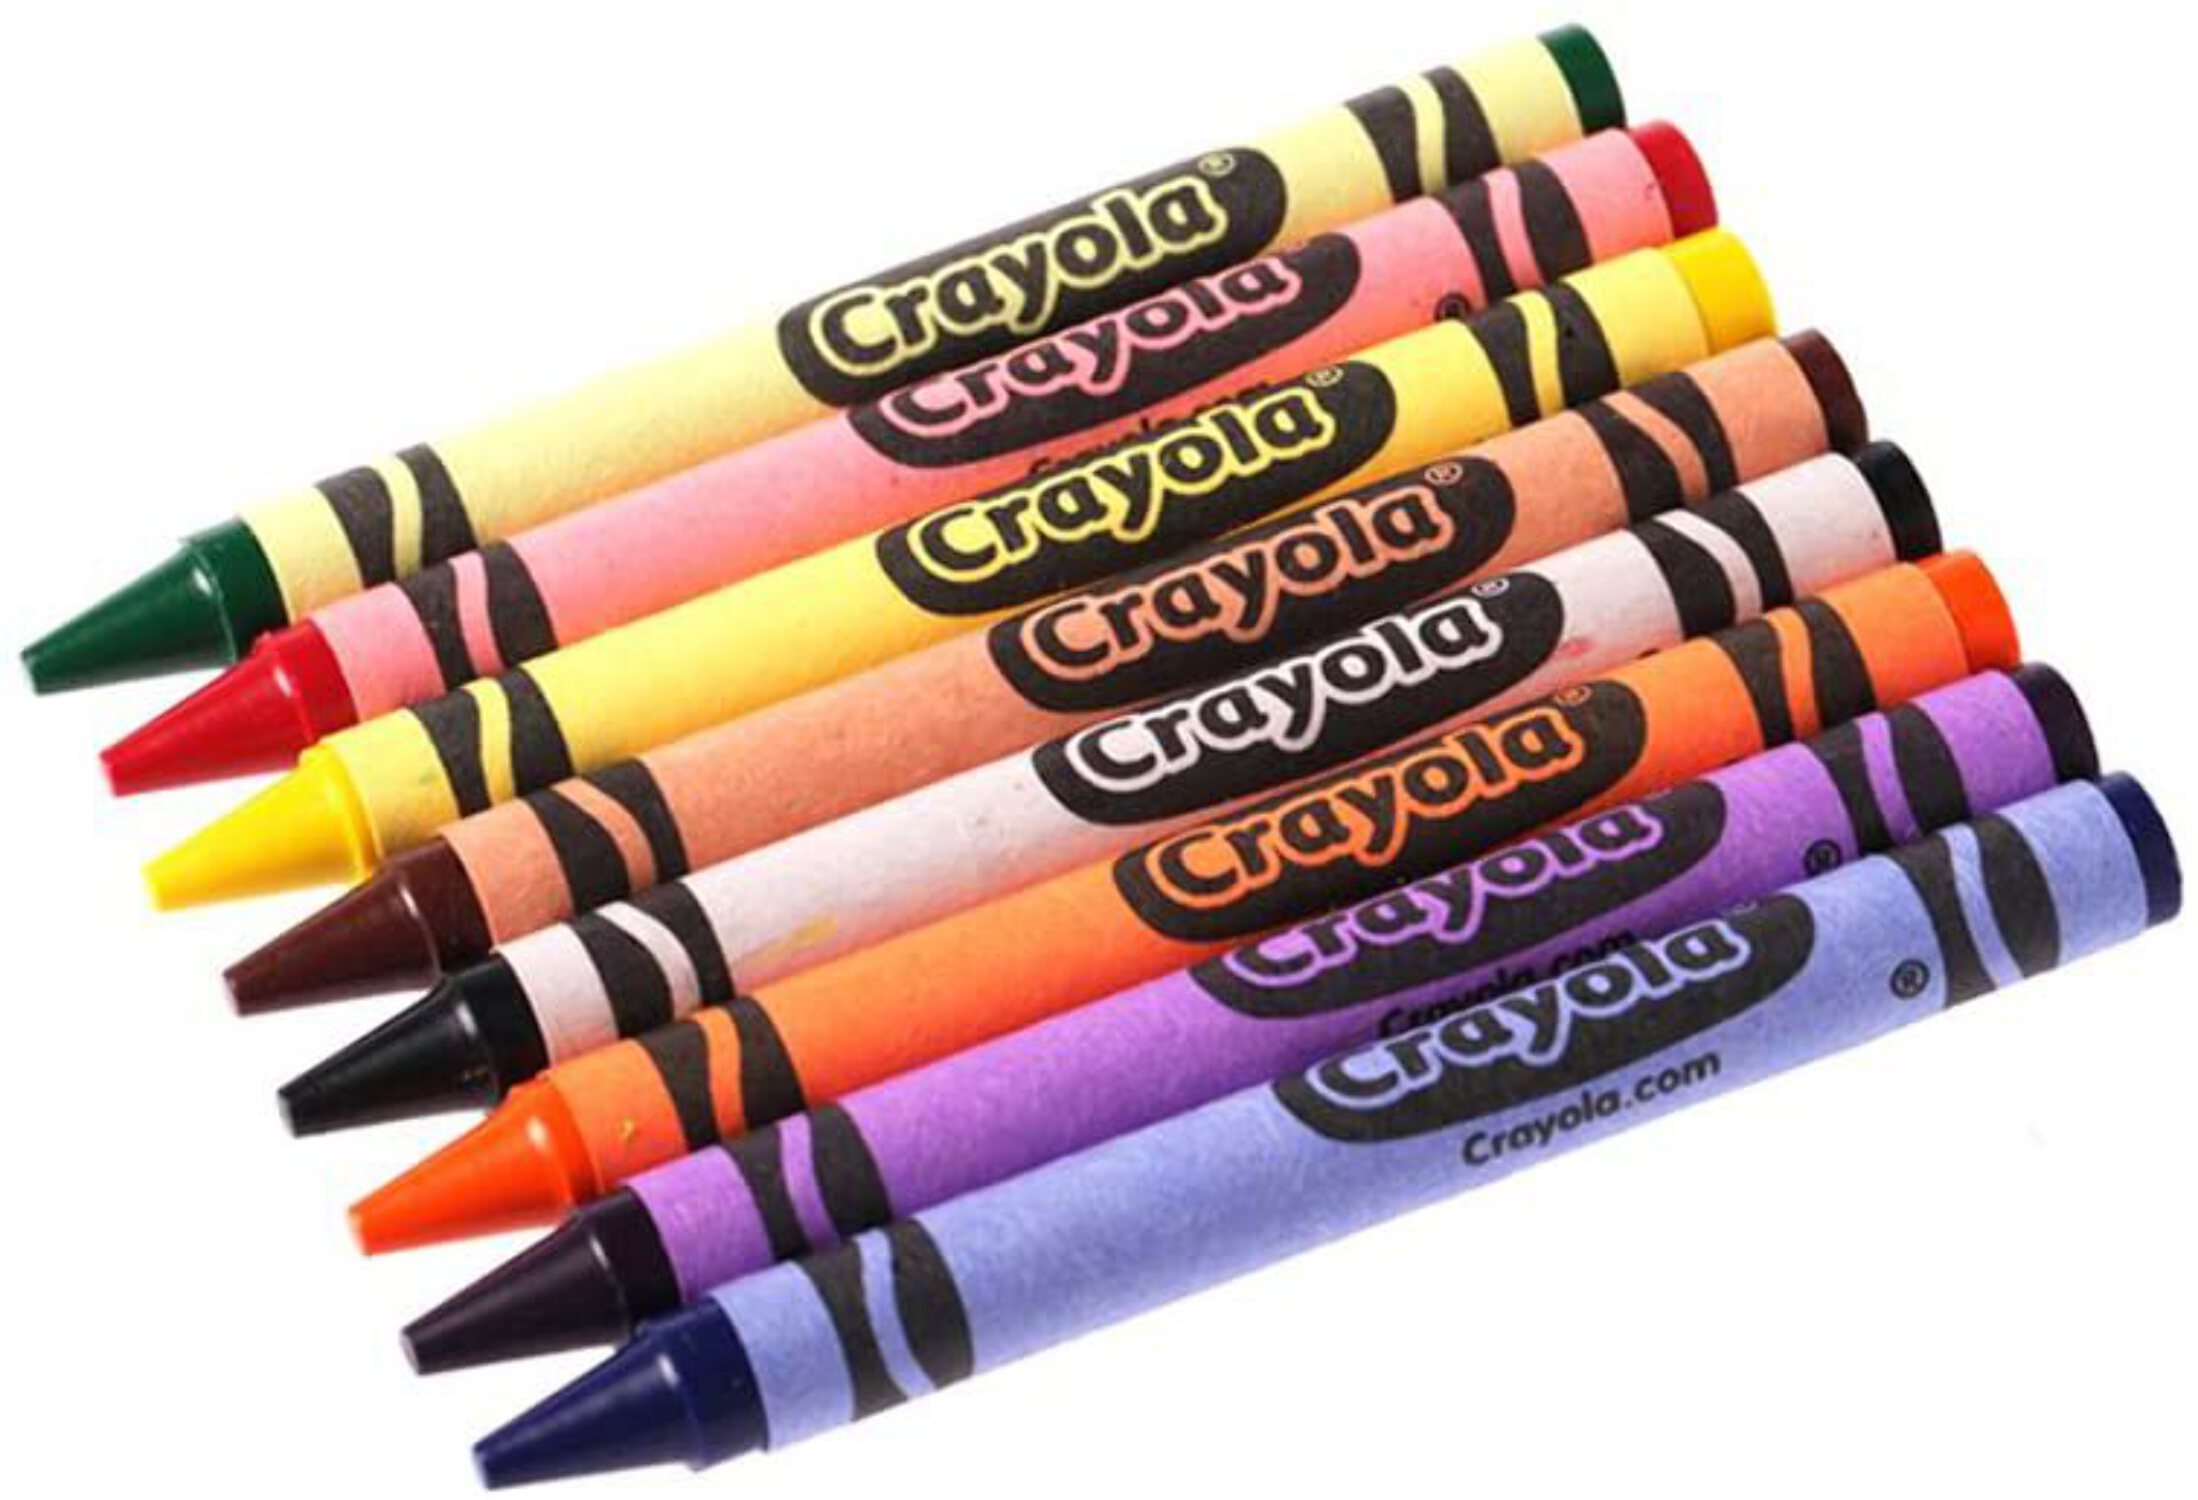 (4 pack) Crayola Classic Crayons, Back to School Supplies for Kids, 8 Ct, Art Supplies - image 5 of 7